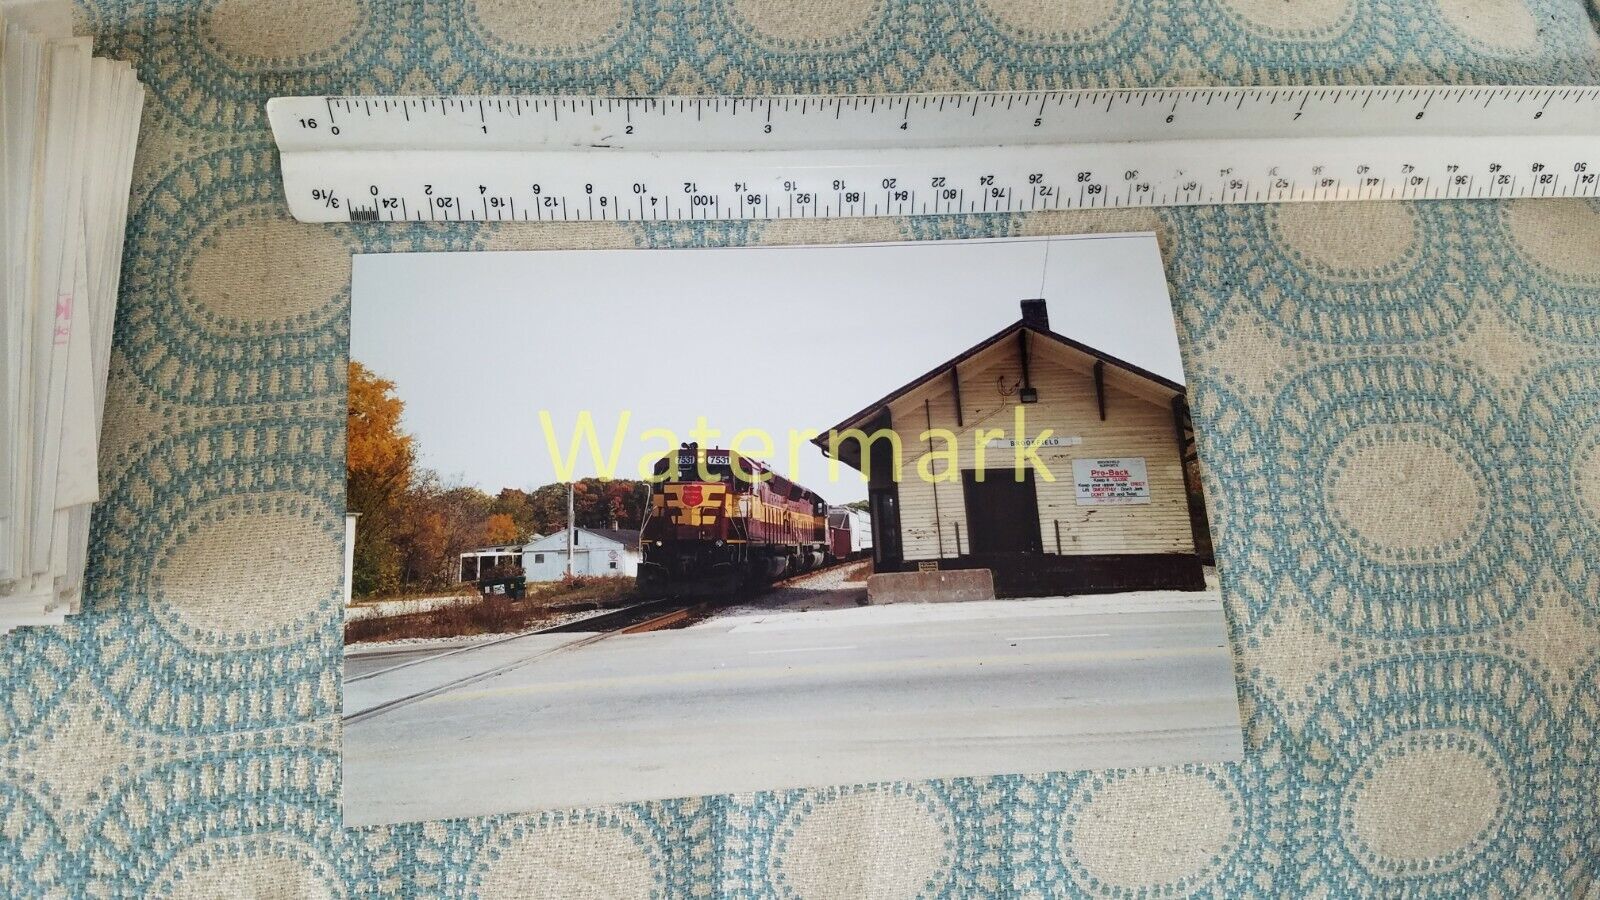 X604 TRAIN ENGINE PHOTO RR WISCONSIN CENTRAL #7531 BROOKFIELD